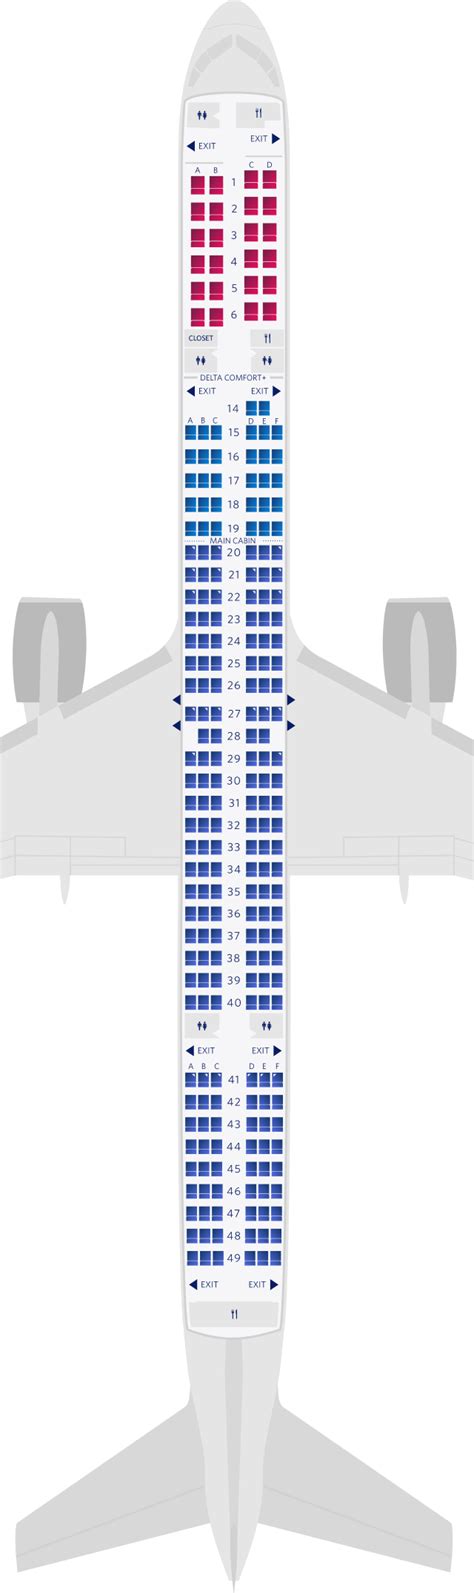 Seat 2A on United Airlines Boeing 757-300 - Updated April 2024 - SeatLink. 0/5.0 with 0 reviews... Home. Airlines. United Airlines. Seat Maps. United Airlines Boeing 757 300 Seat Map. Seat 2a. United Airlines. Reviews. Seating. Charts. Jump to: Amenities, Seat Reviews, Seat Photos, Map key. imperial metric. First Class seat 2A amenities.. 